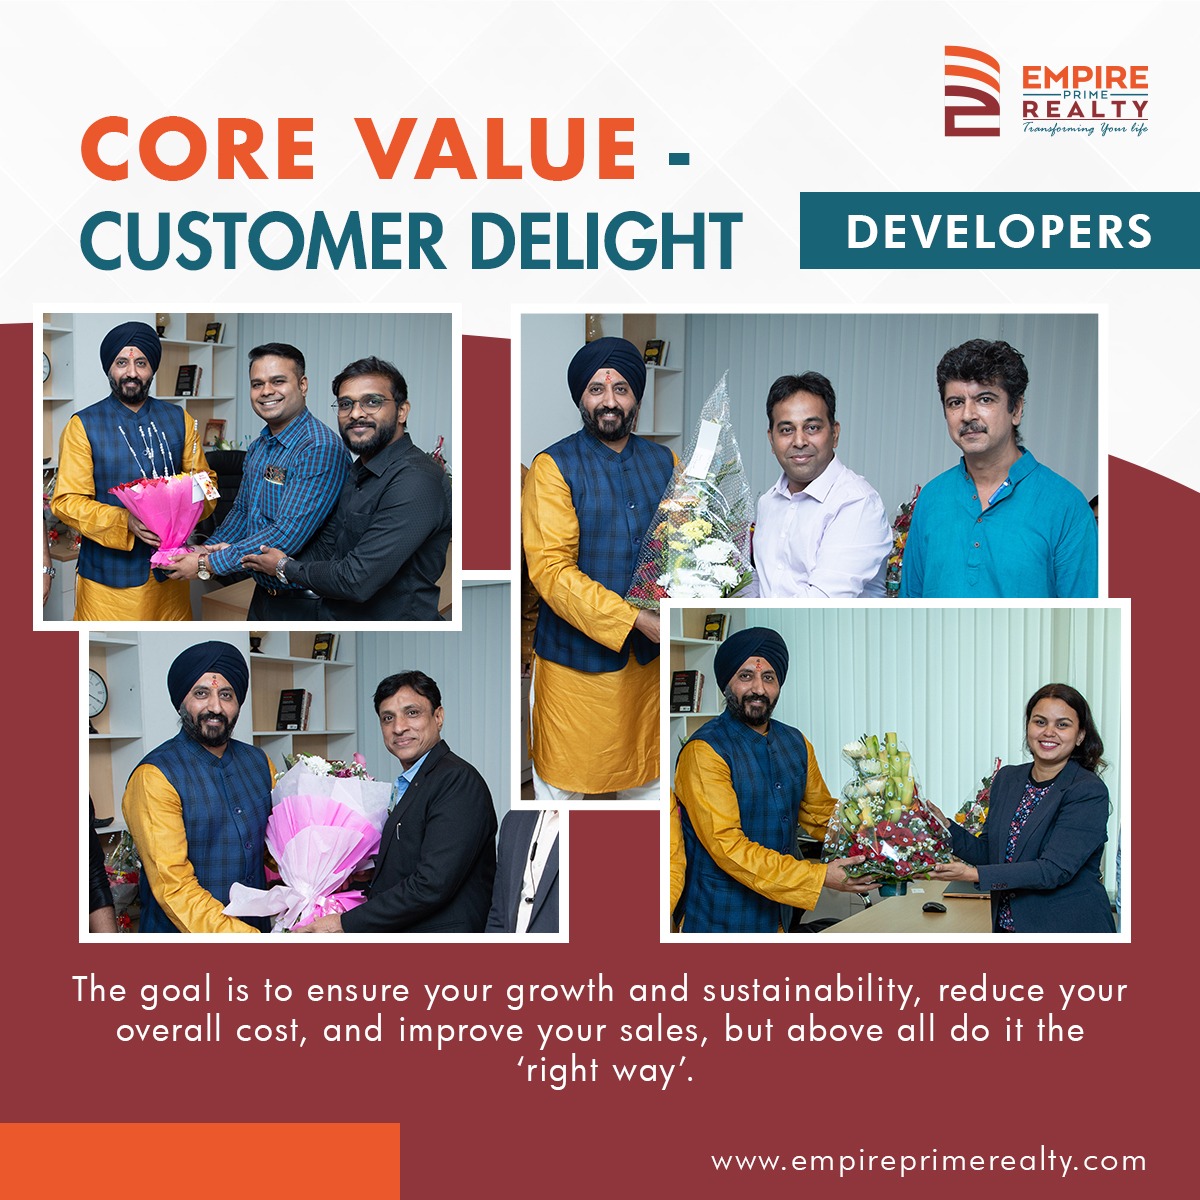 One main purpose to deliver exceptional services with no compromise on #transparency & #ethicalpractices. Our utmost priority will only be #CustomerDelight!

#empireprimerealty #propconciergeservices #corevalues #realtyguide #personalguidance #mumbairealestate #realestateindia